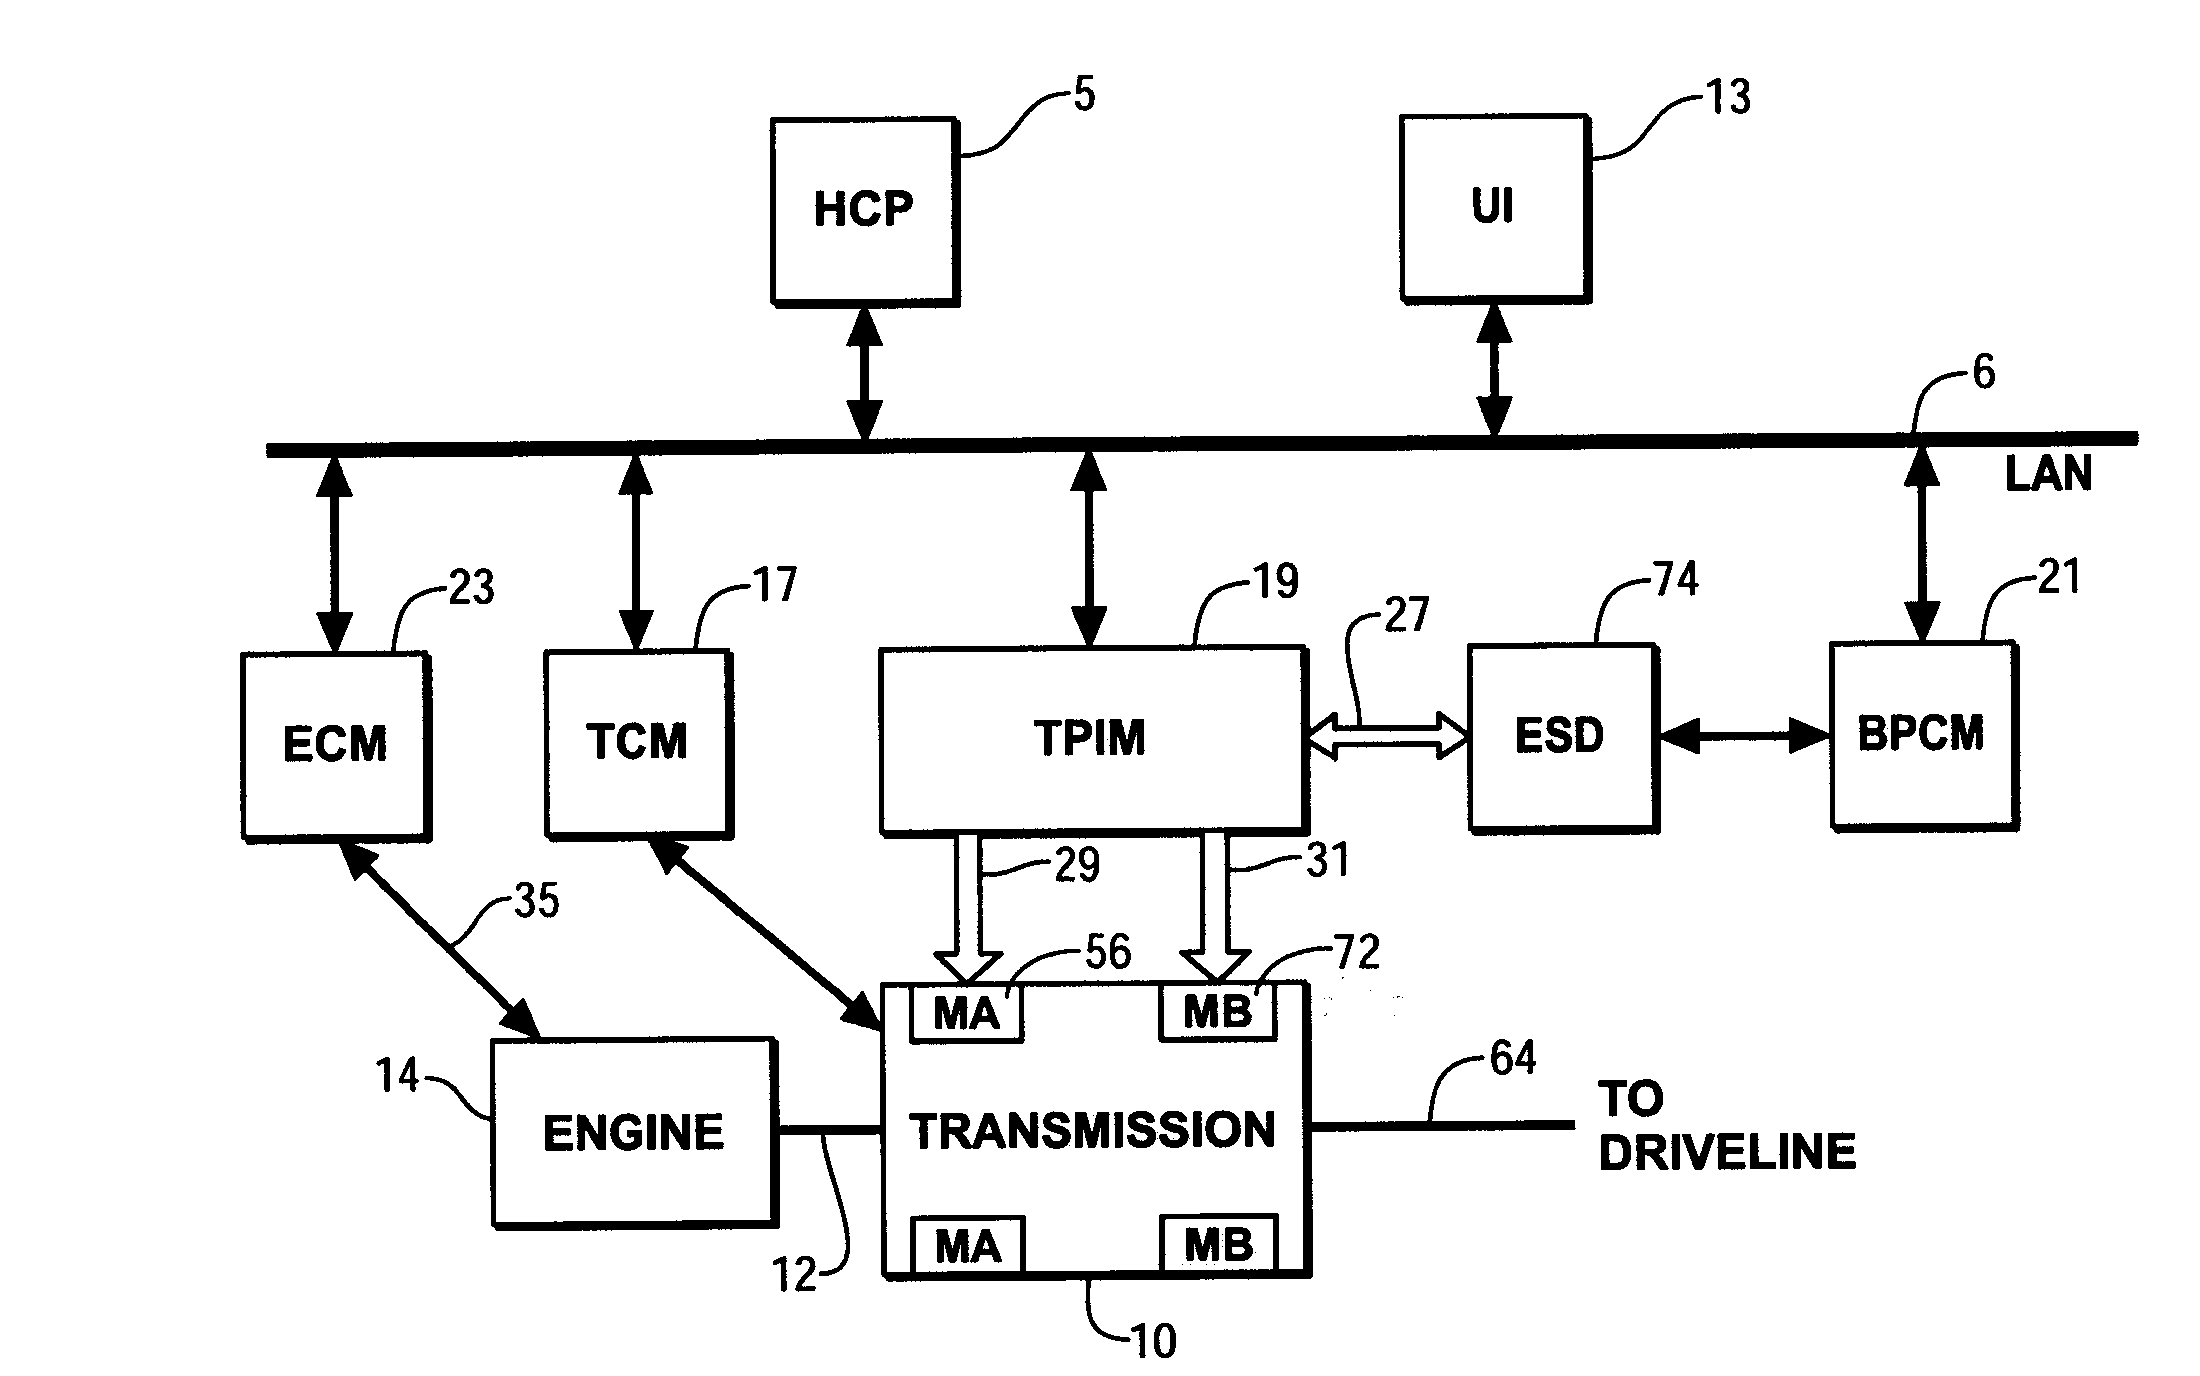 Apparatus and method to control transmission torque output during a gear-to-gear shift